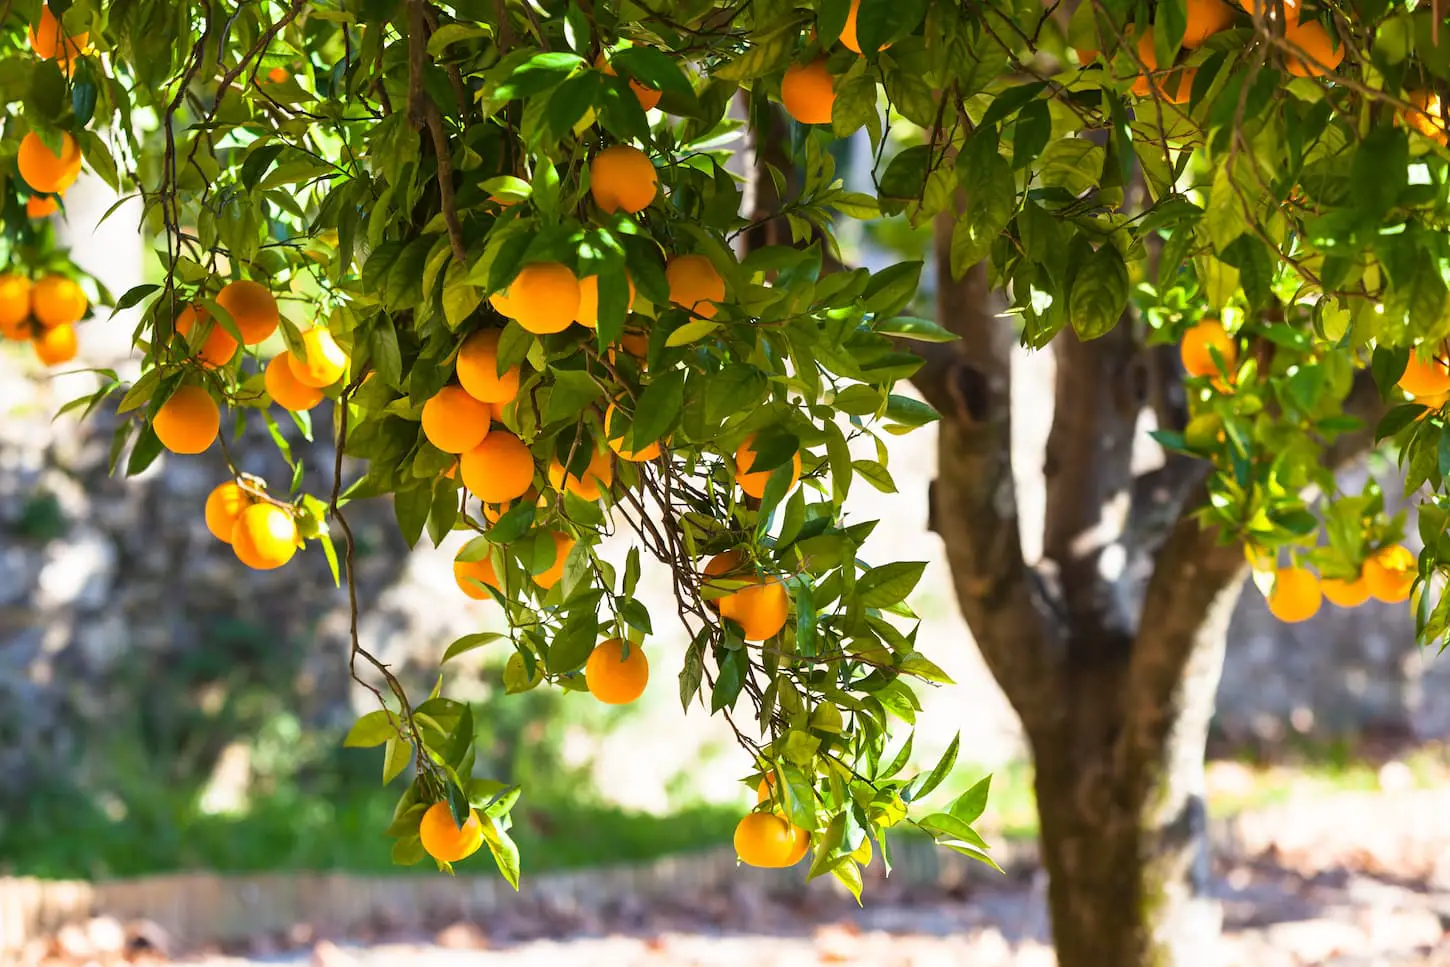 An image of an orange tree with abundant fruits in the garden.